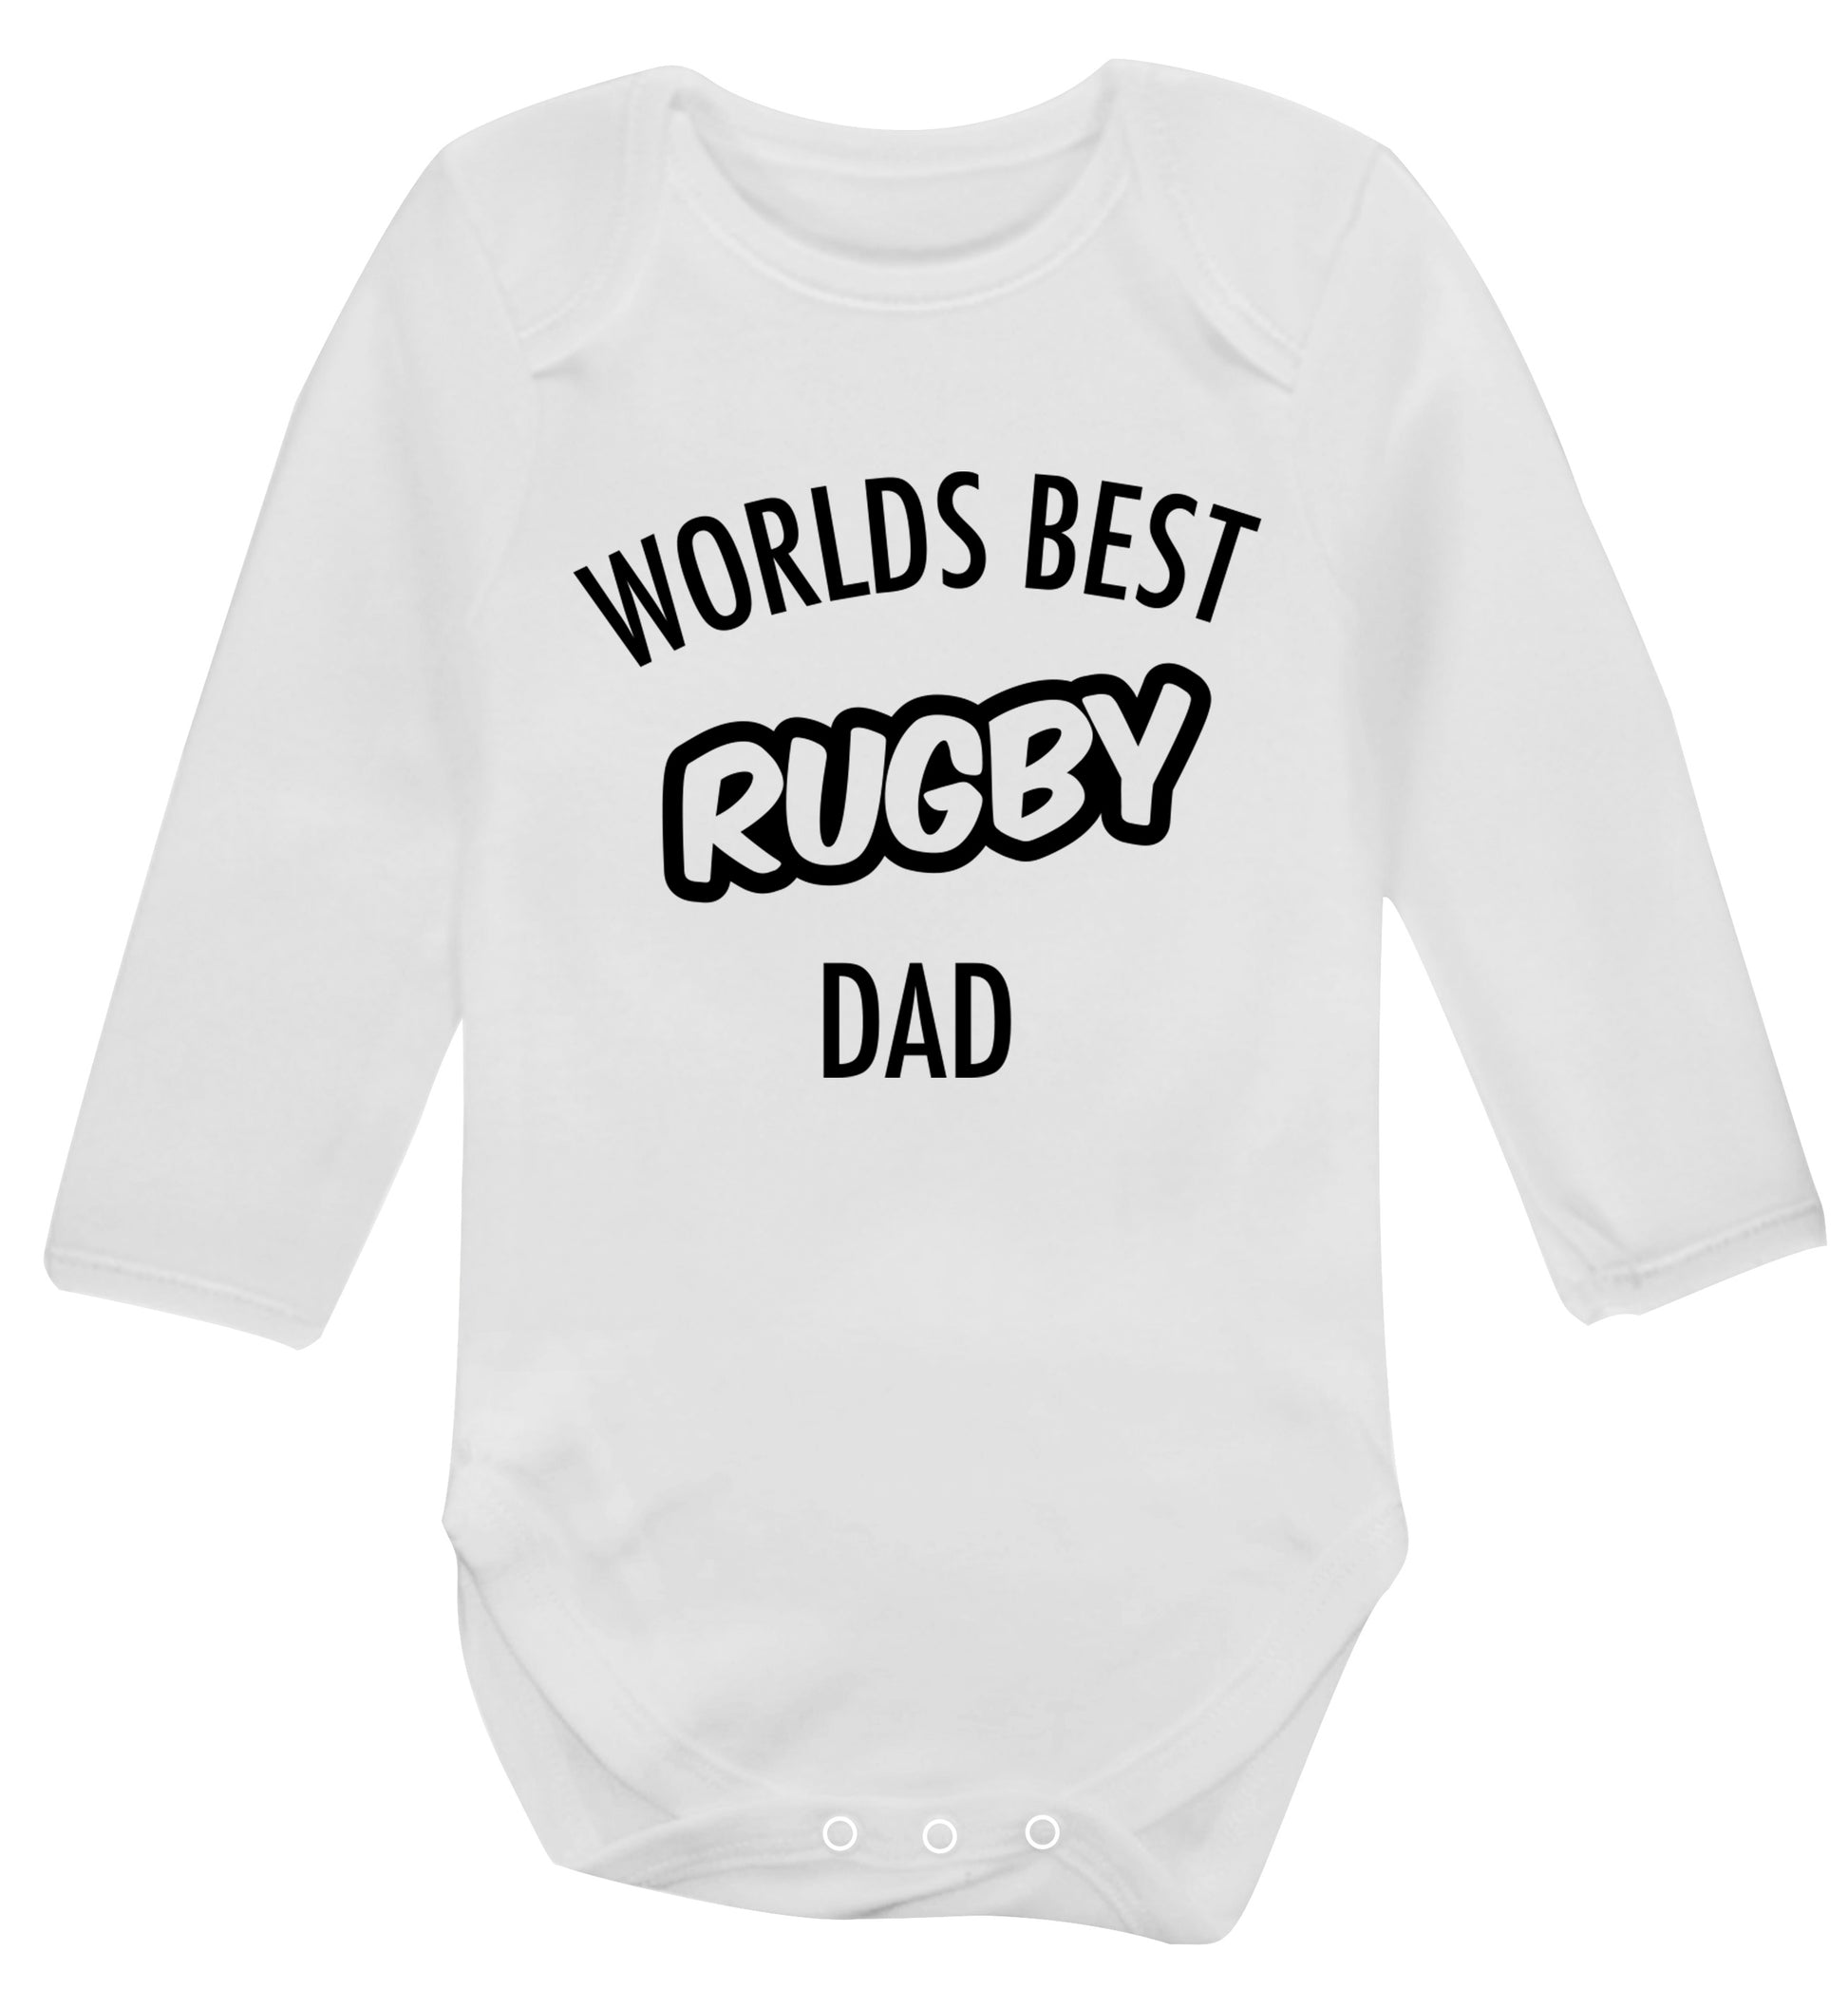 Worlds best rugby dad Baby Vest long sleeved white 6-12 months